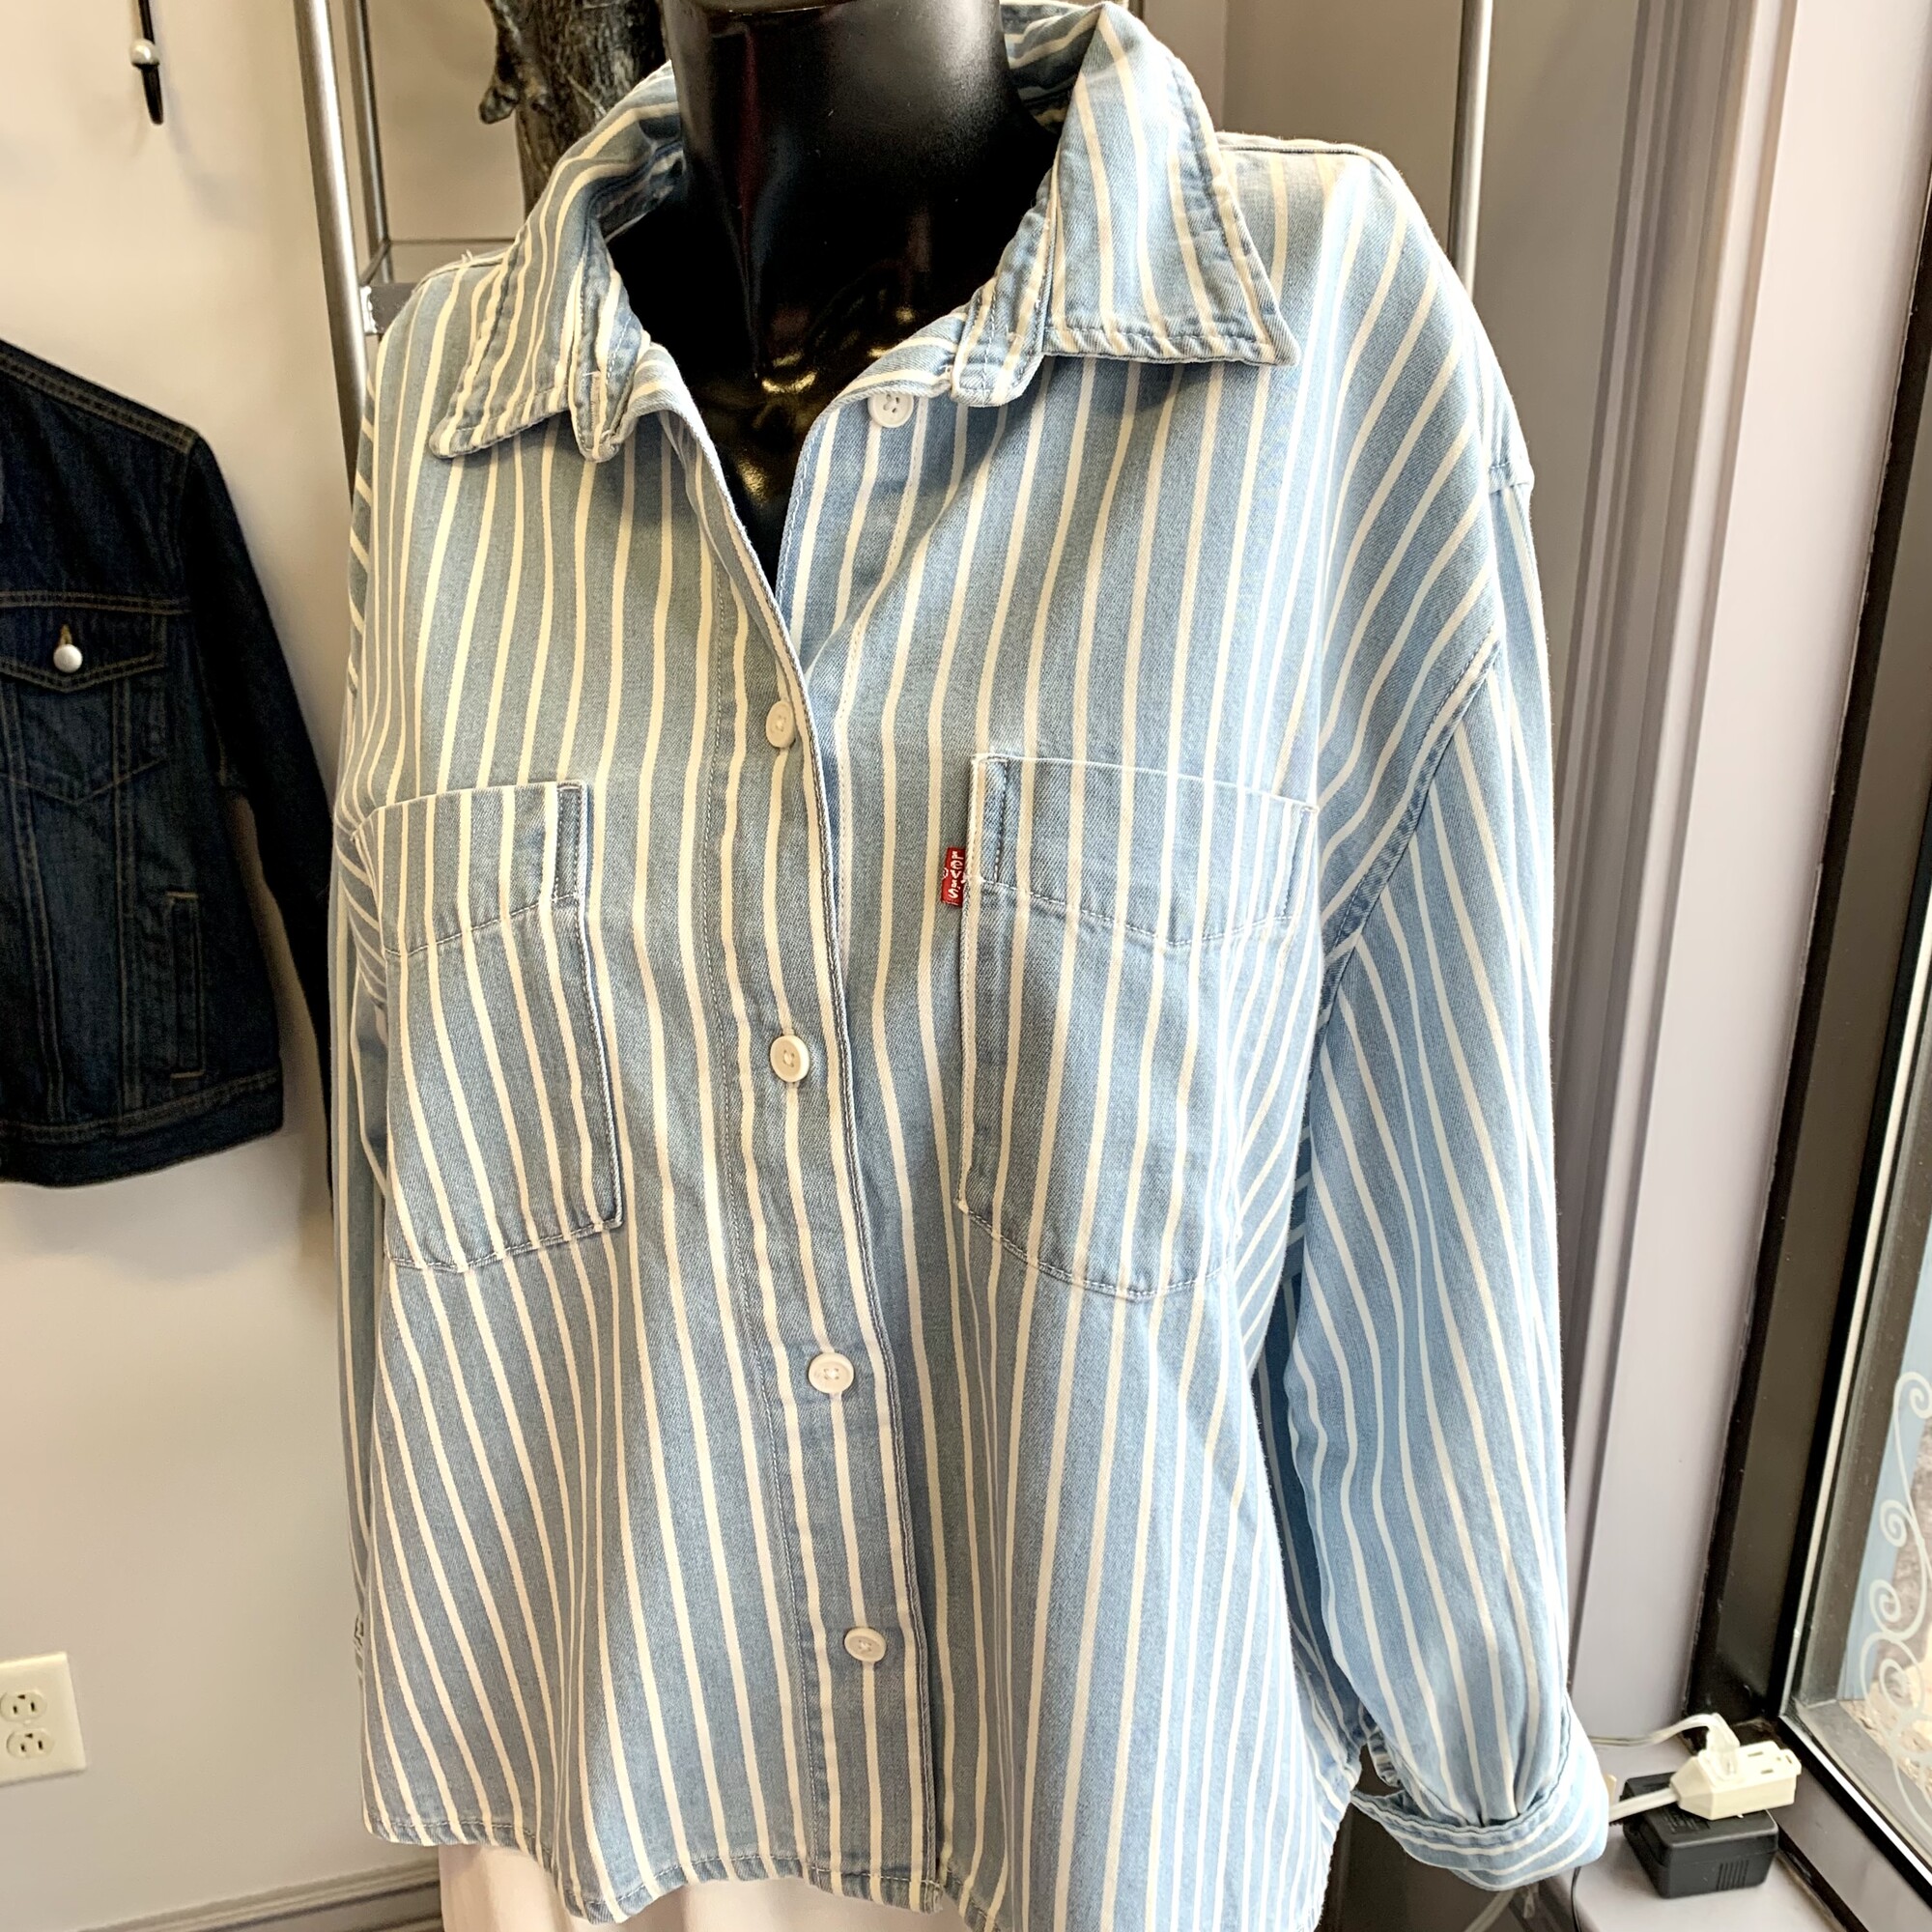 Levis Shirt Striped,
Colour: Blue and white,
Size: Medium,
Shorter model to wear loose,